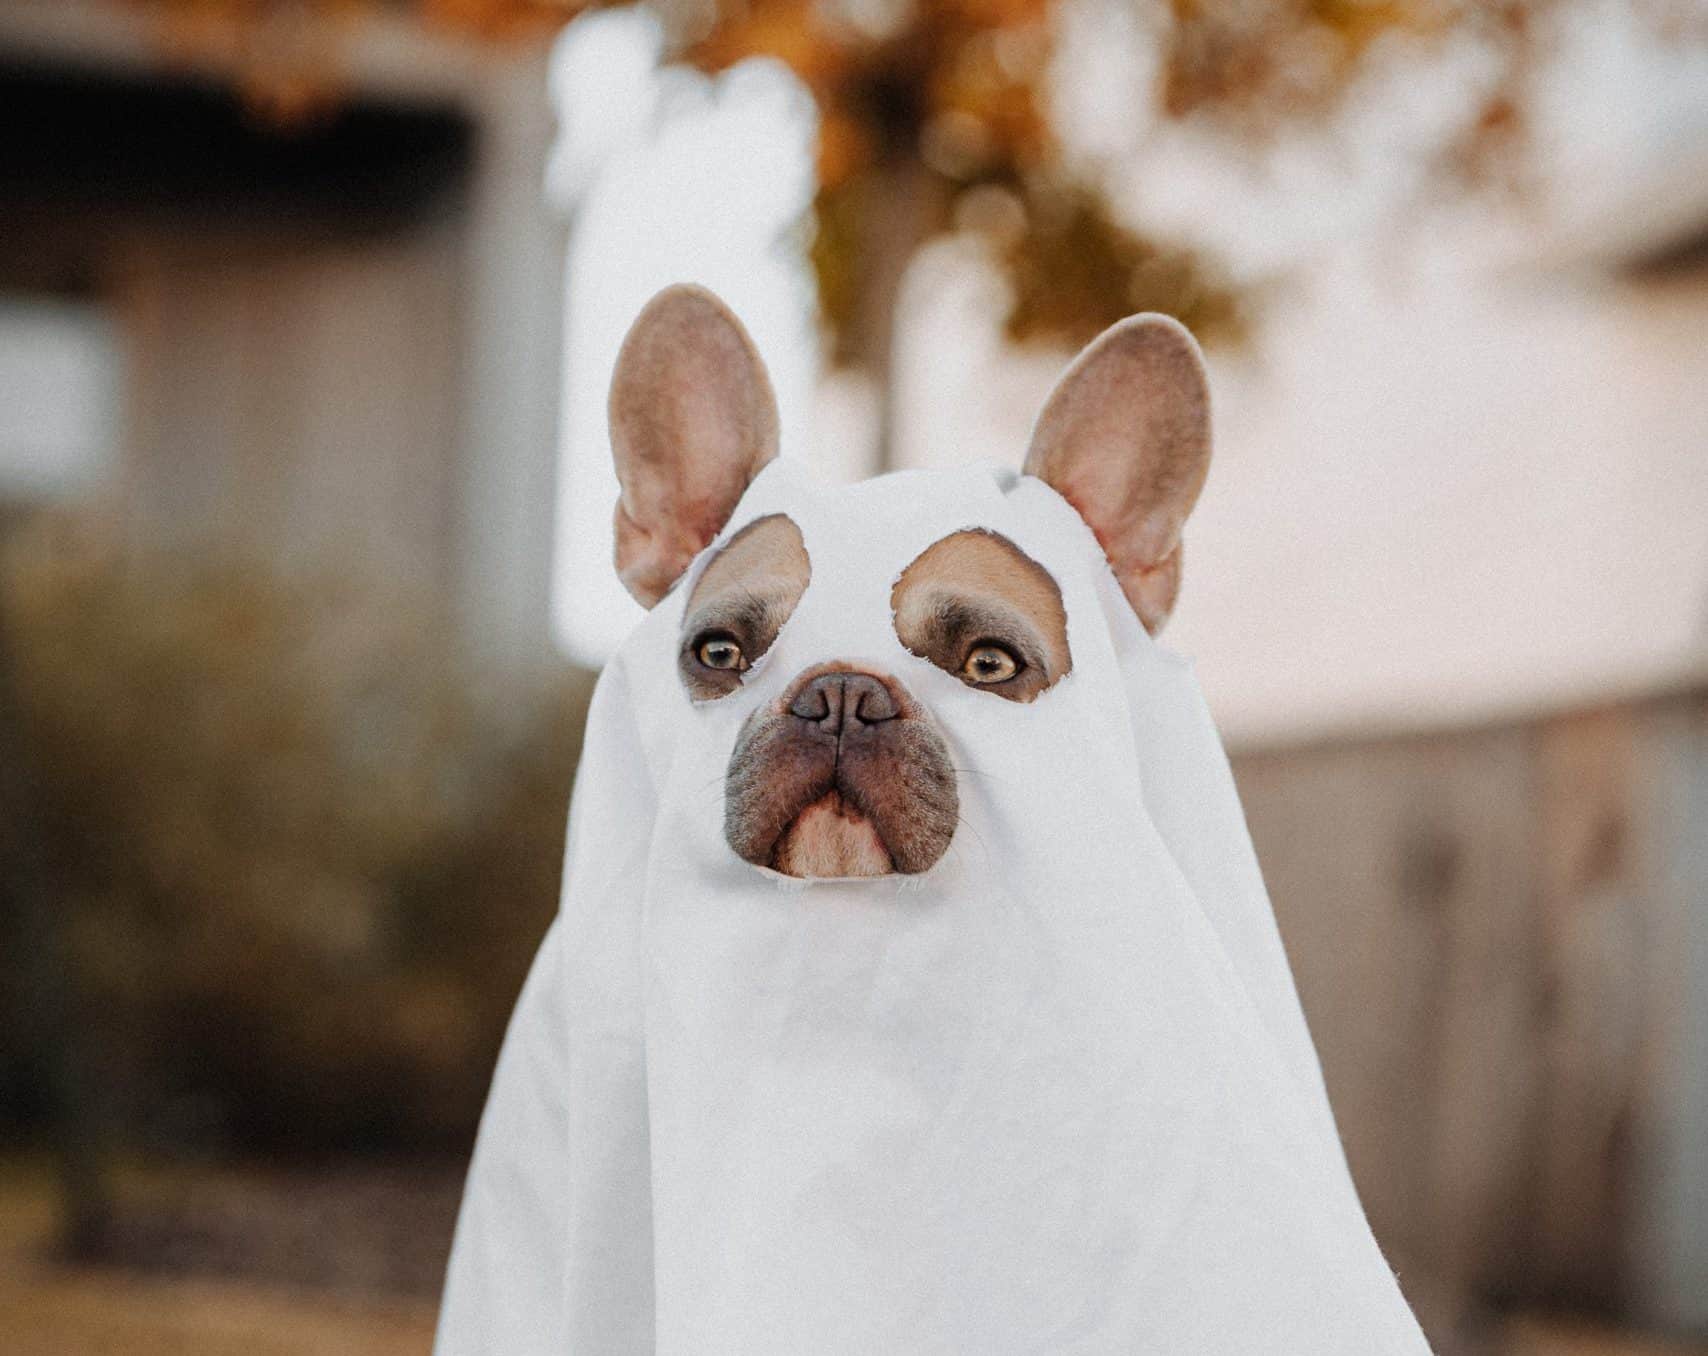 10 Best Dog Halloween Costumes for 2022